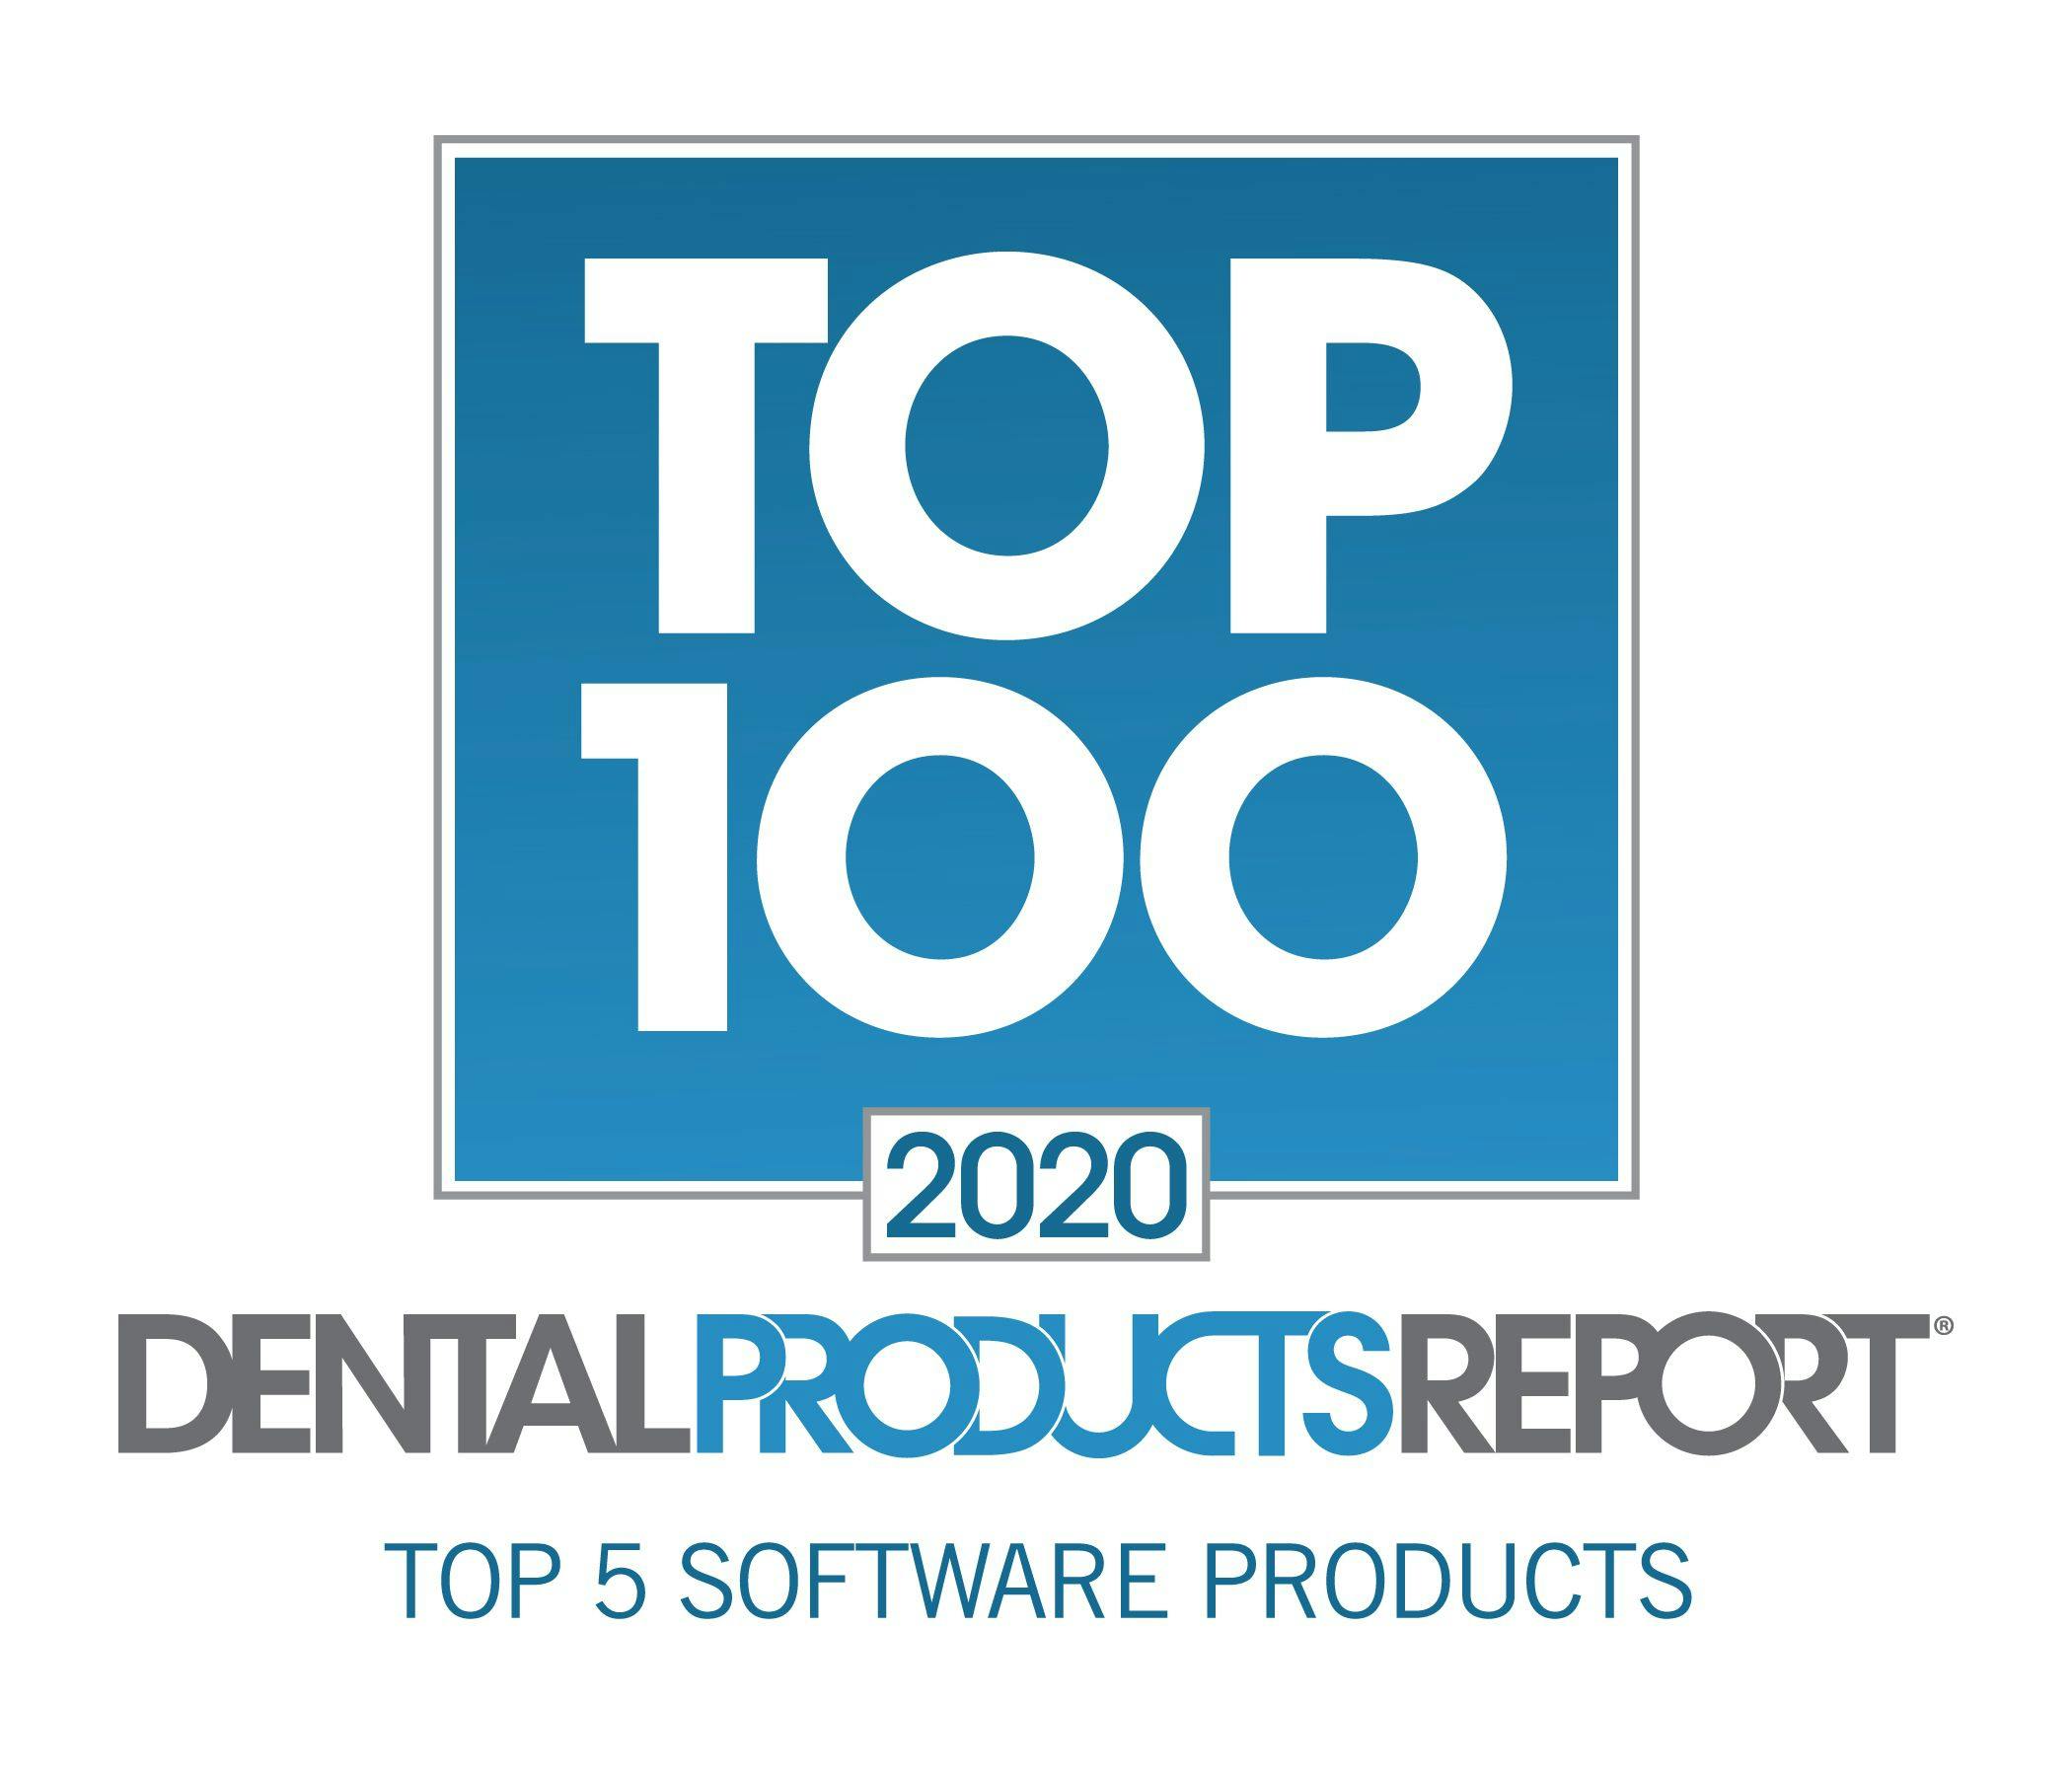 Top 5 Software Products of 2020